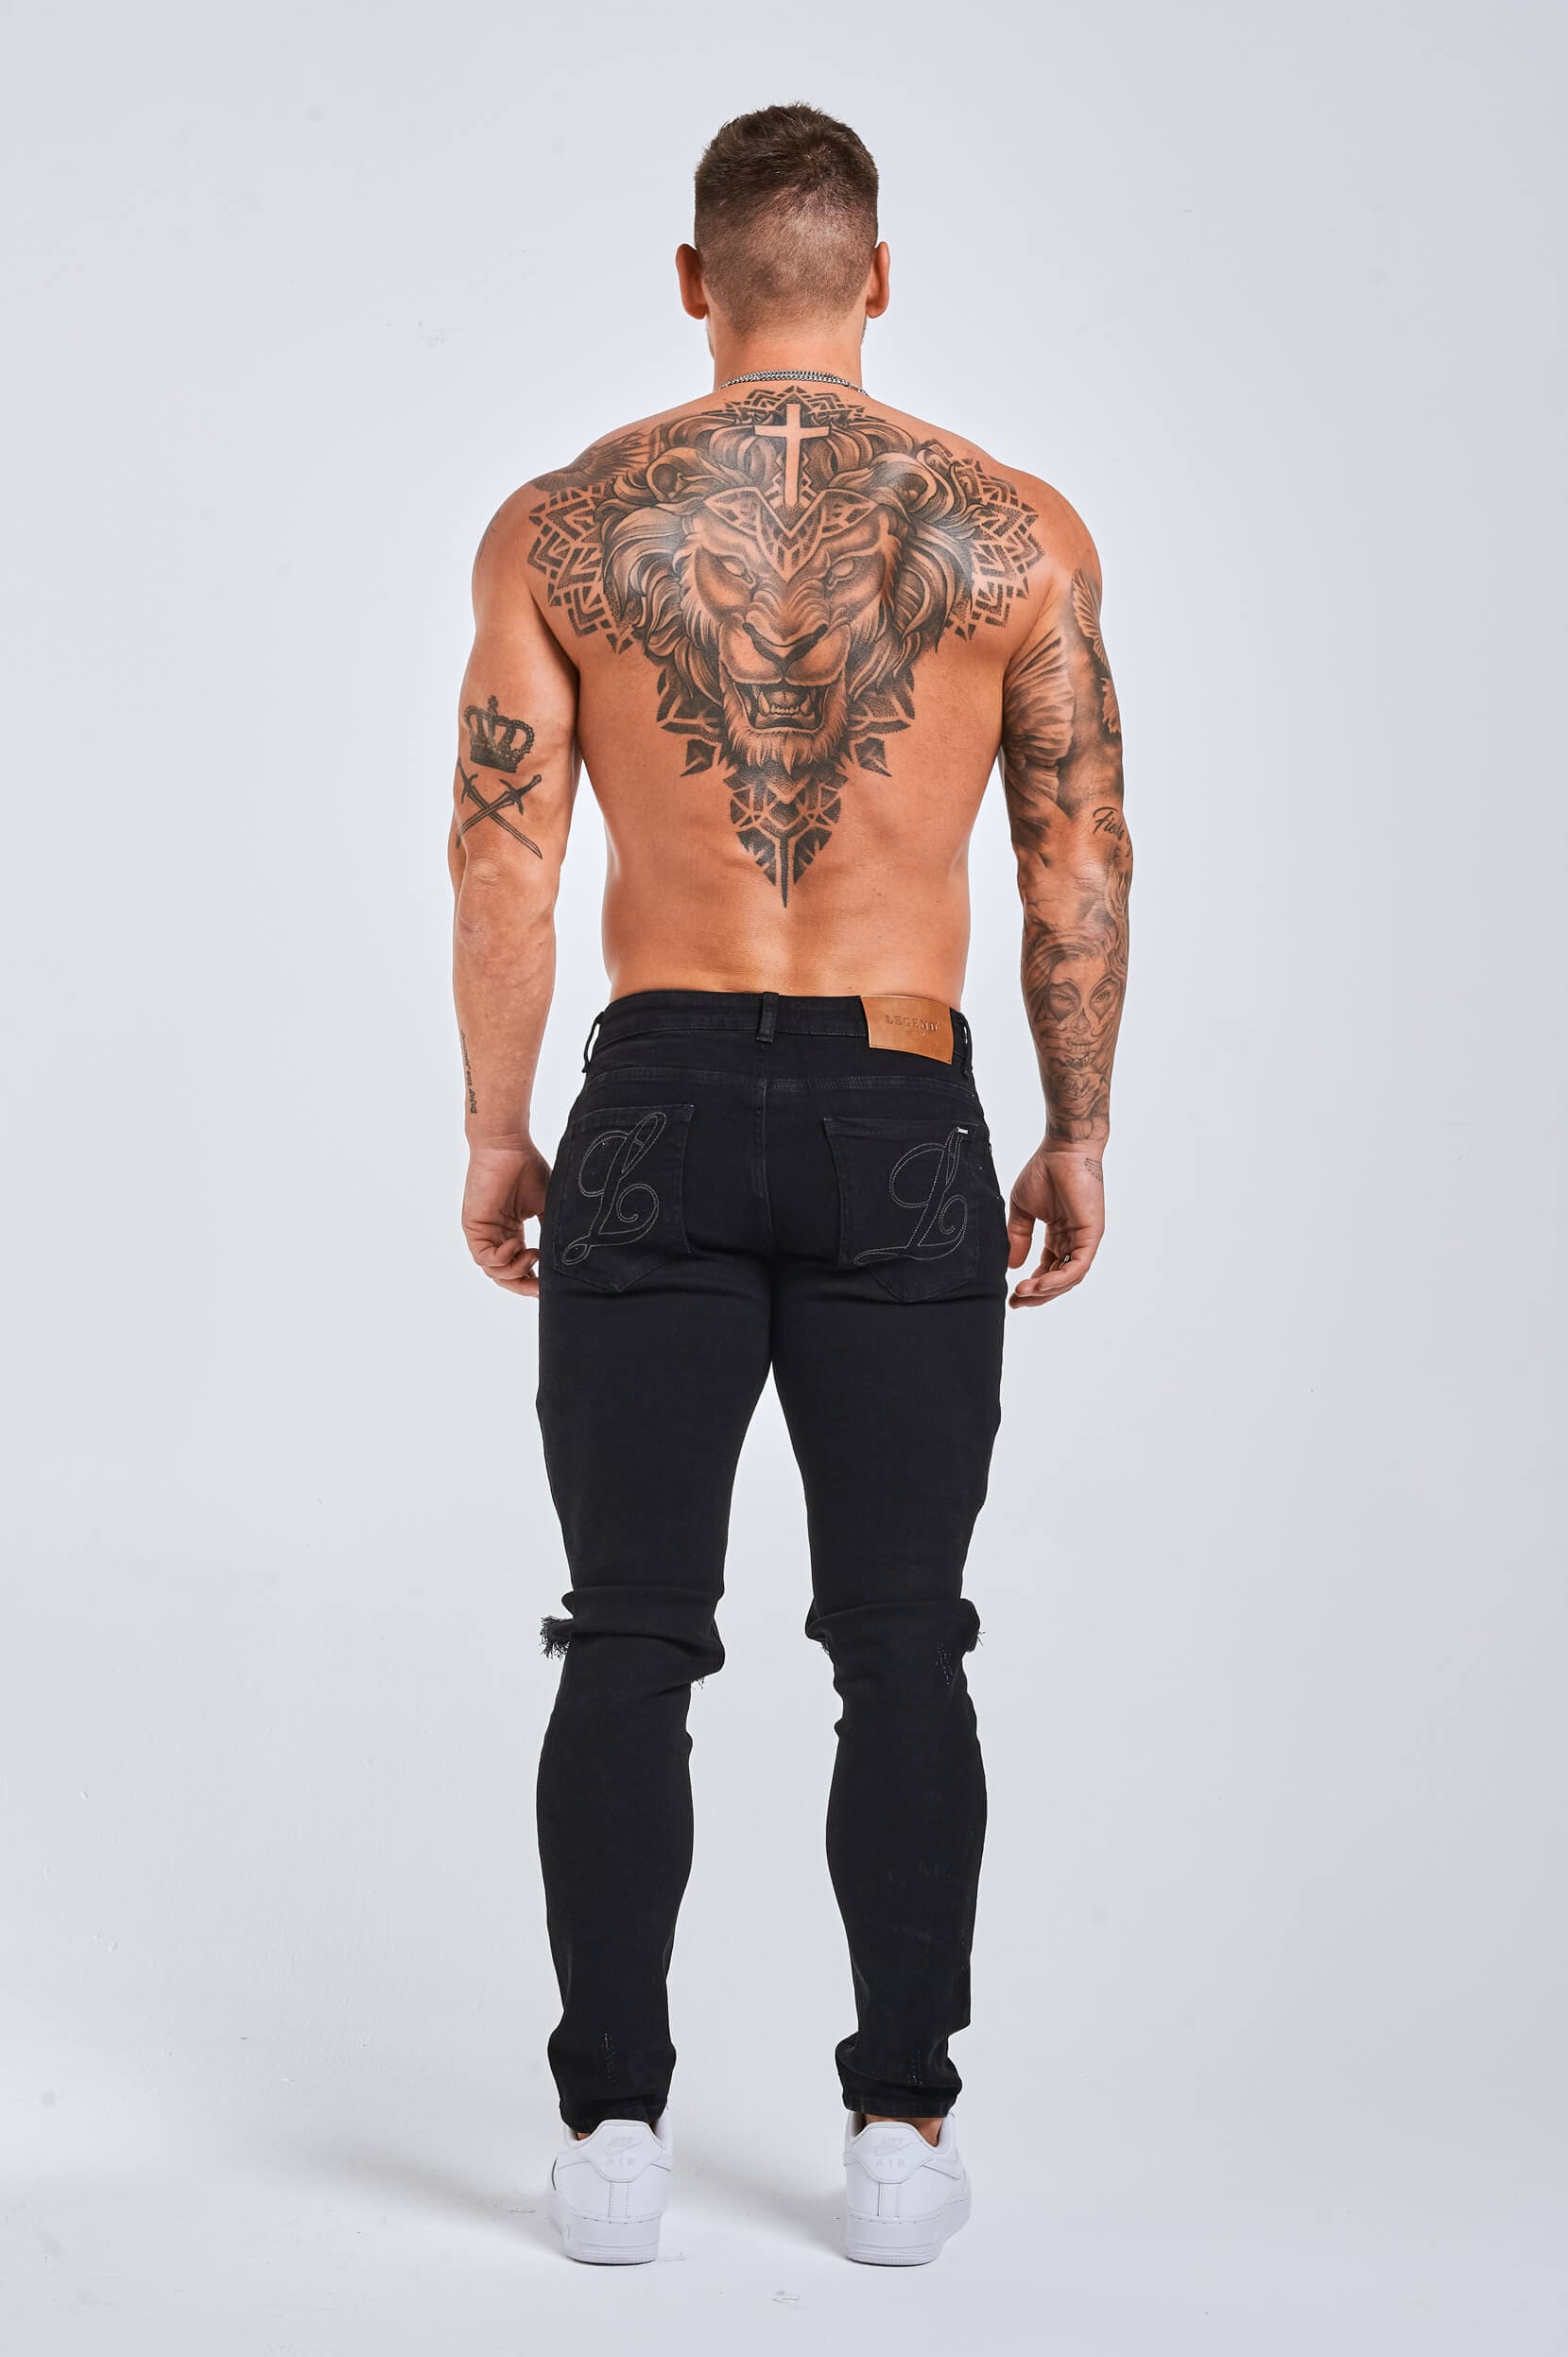 Legend London Jeans - slim 2.0 SLIM FIT JEANS 2.0 RIPPED &amp; REPAIRED - BLACK